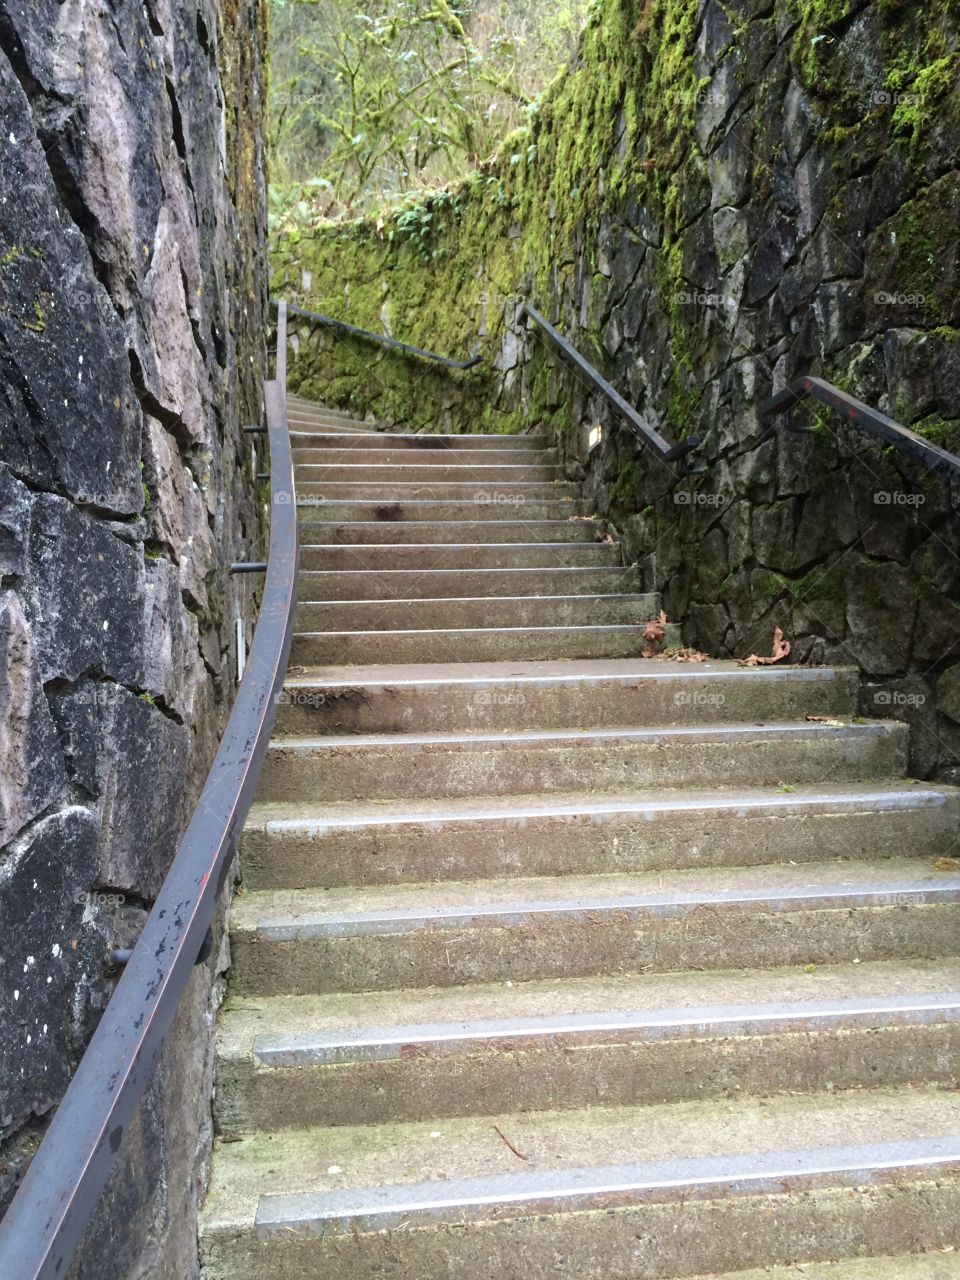 Great mossy stairs